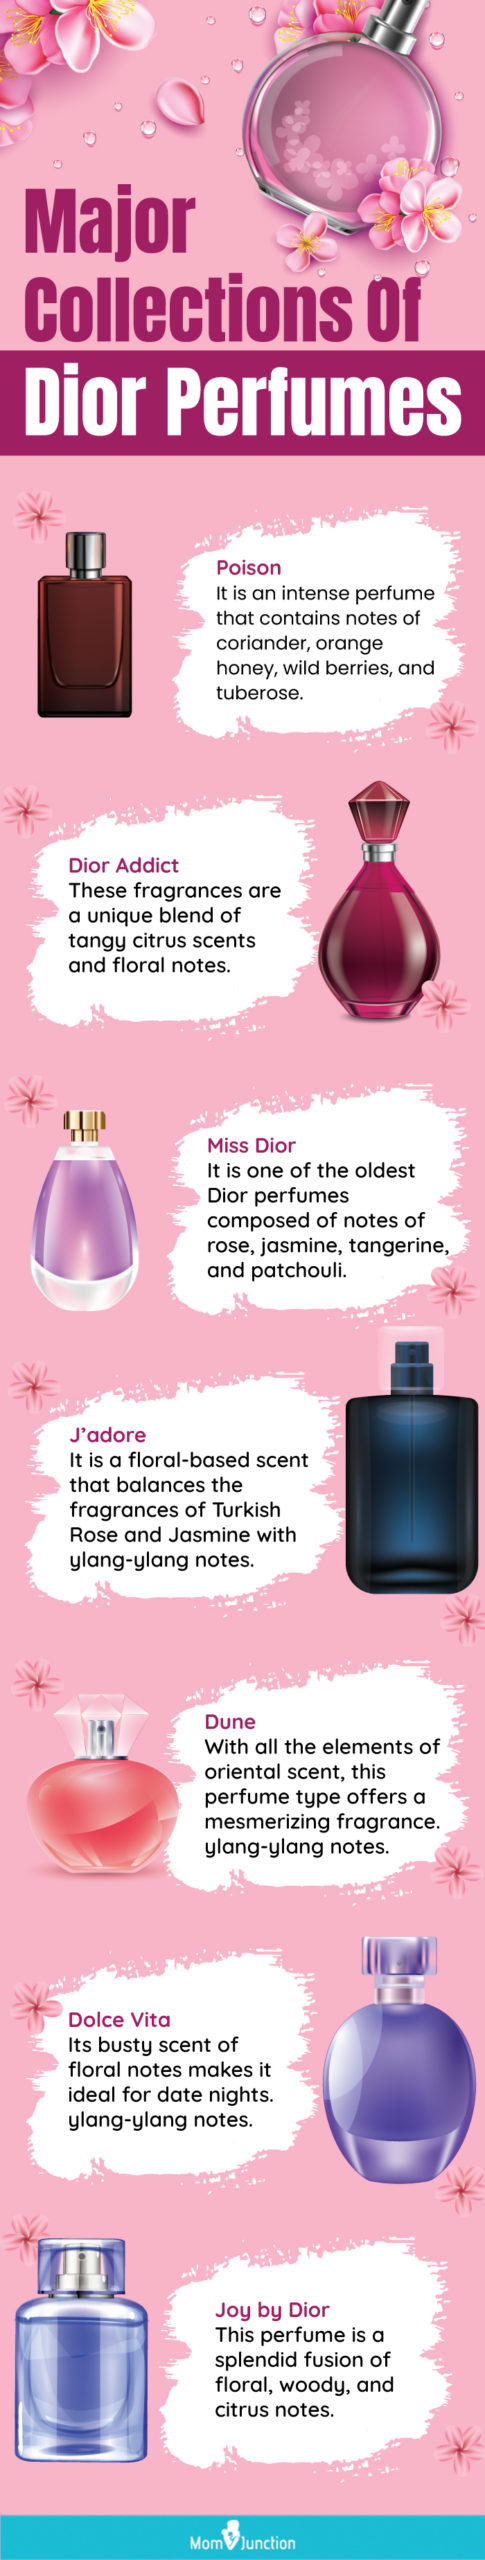 Major Collections Of Dior Perfumes